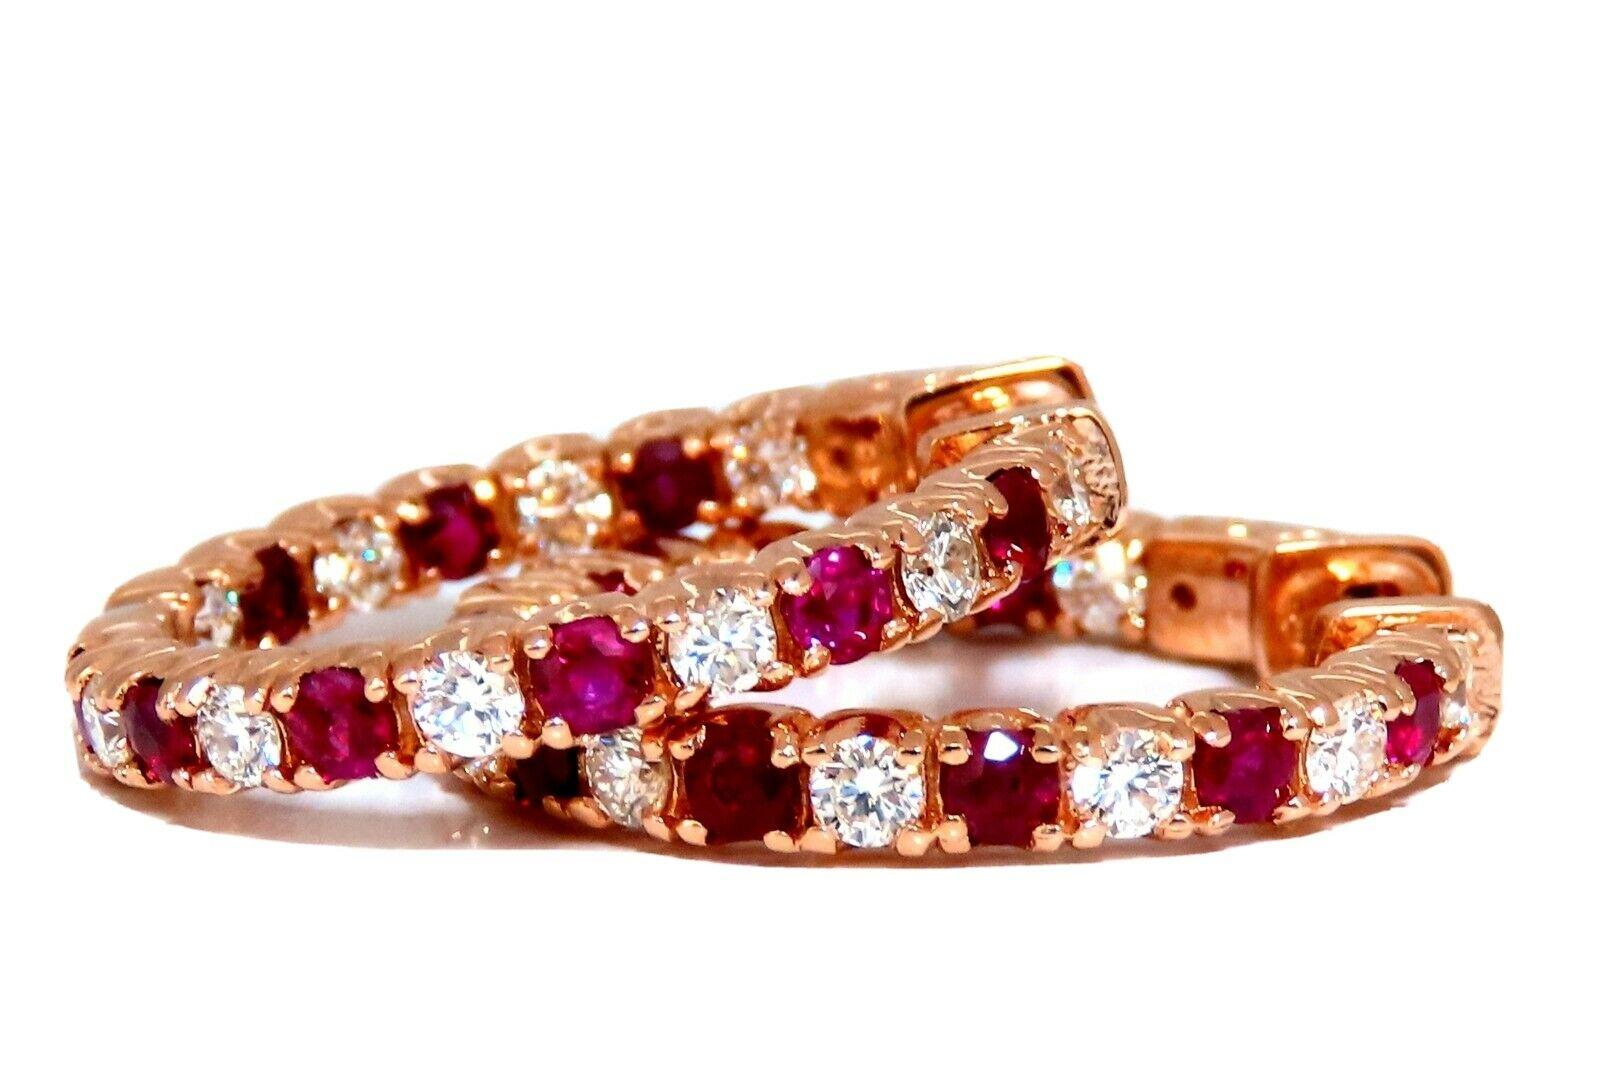 3.45ct Natural Ruby Diamonds Hoop Earrings 14kt Rose Gold Inside Out In New Condition For Sale In New York, NY